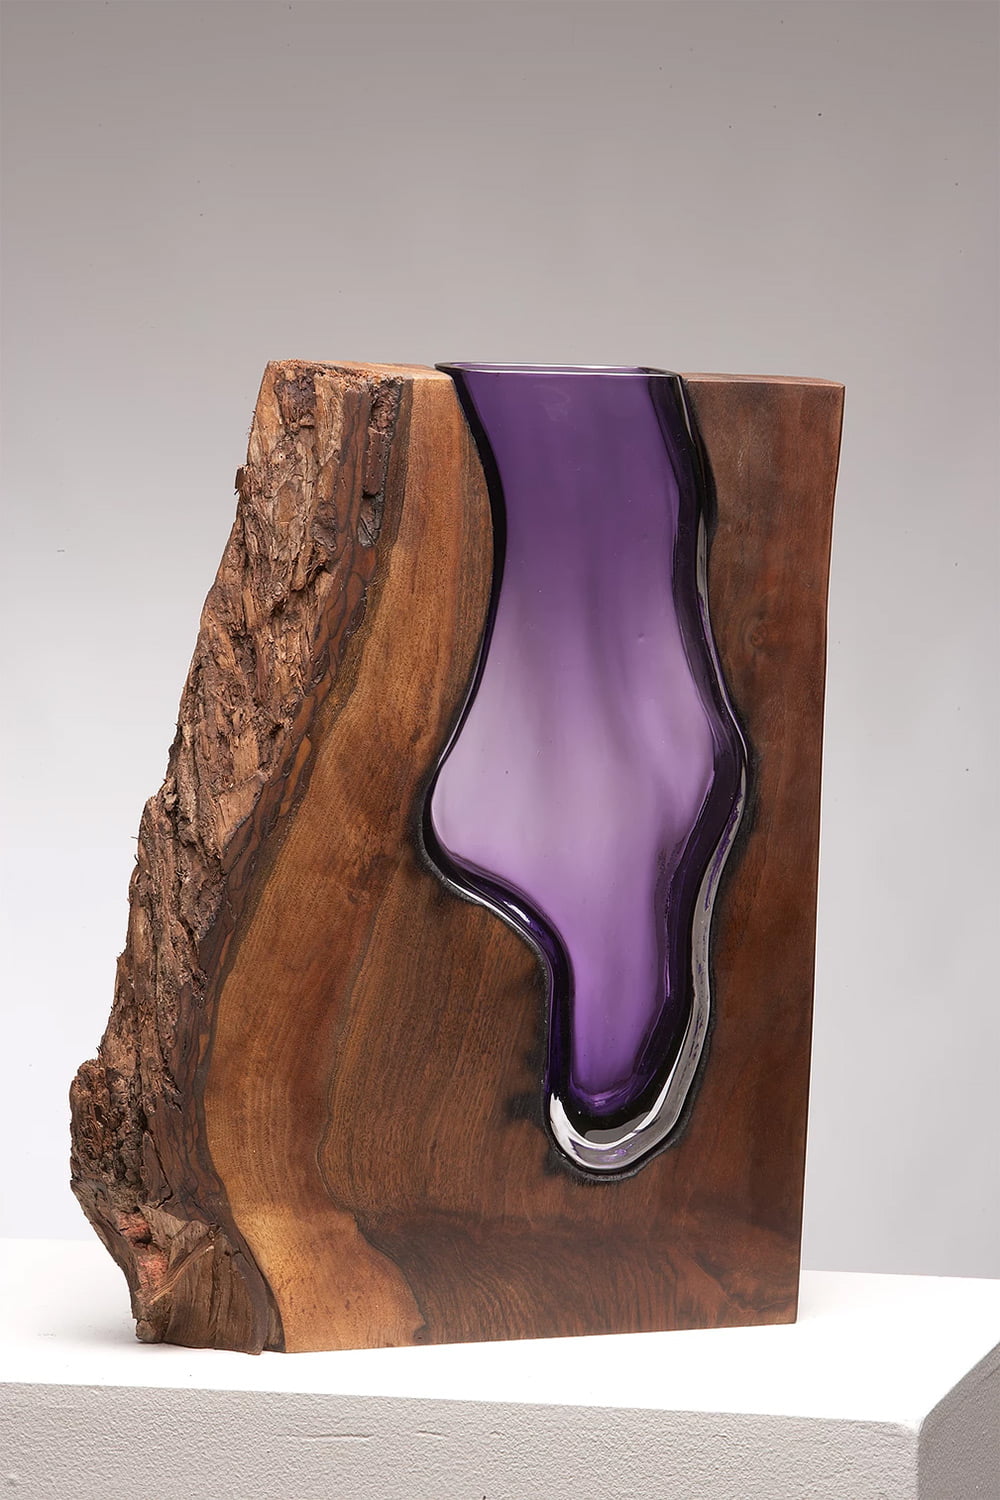 Wood Glass Glass Vases Shaped Into Wooden Enclosures By Scott Slagerman 1